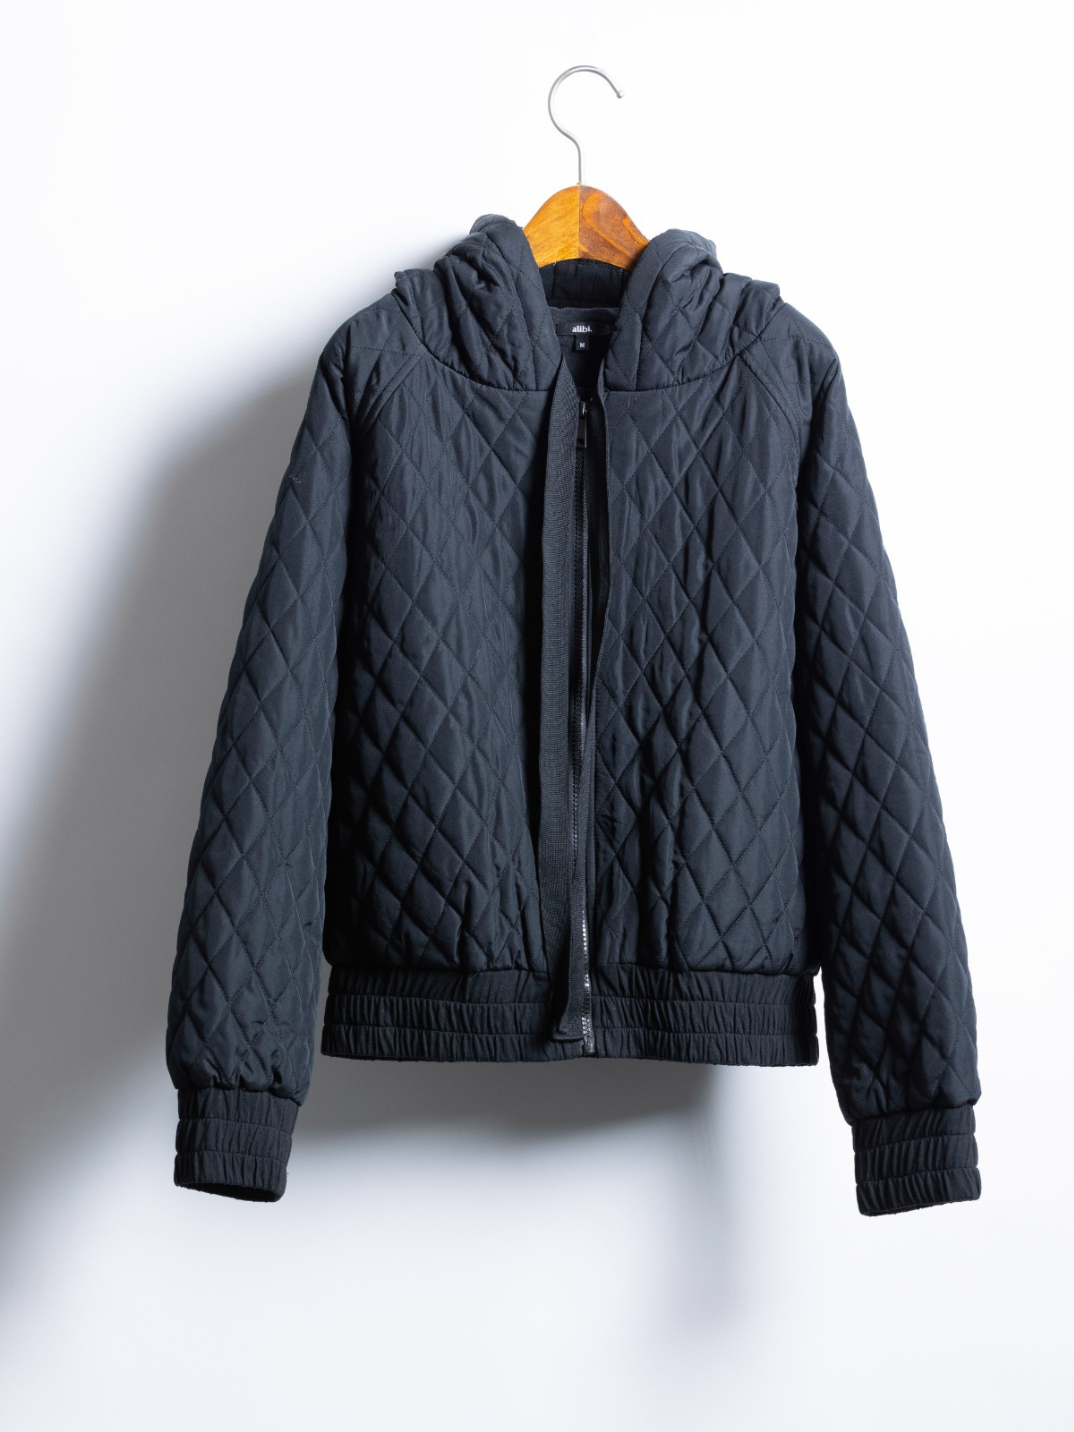 the quilted bomber jacket sustainable fashion eco-friendly The Quilted Bomber is the ultimately cosy jacket for cooler temperatures. We used the Recycled polyester on shell with recycled cotton mix with recycled polyester as lining.